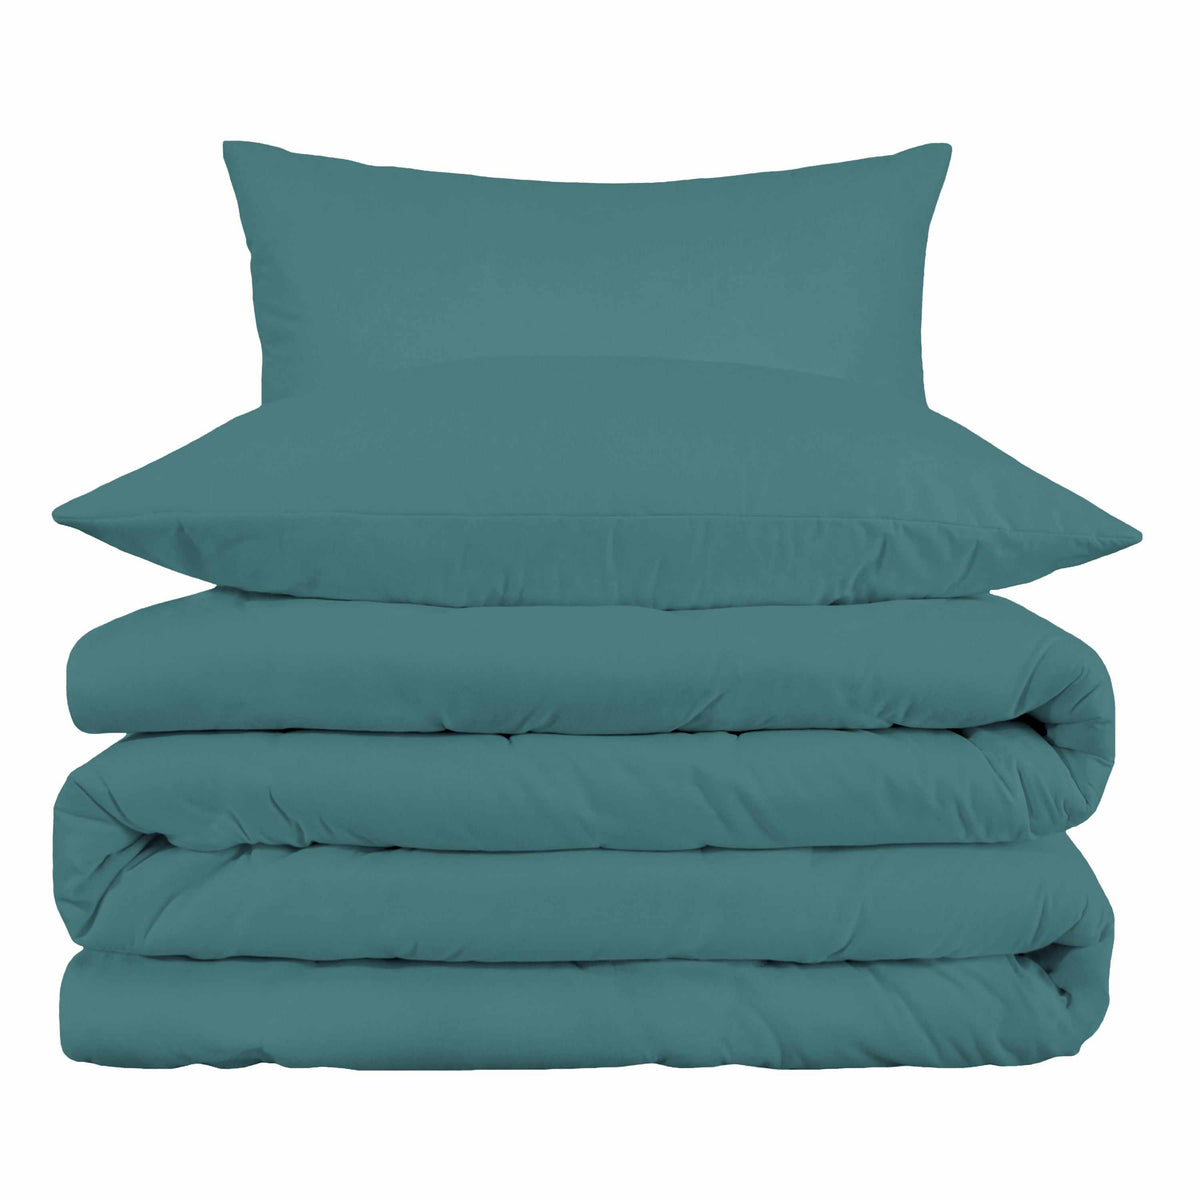  Superior Egyptian Cotton Solid All-Season Duvet Cover Set with Button Closure - Deep Sea